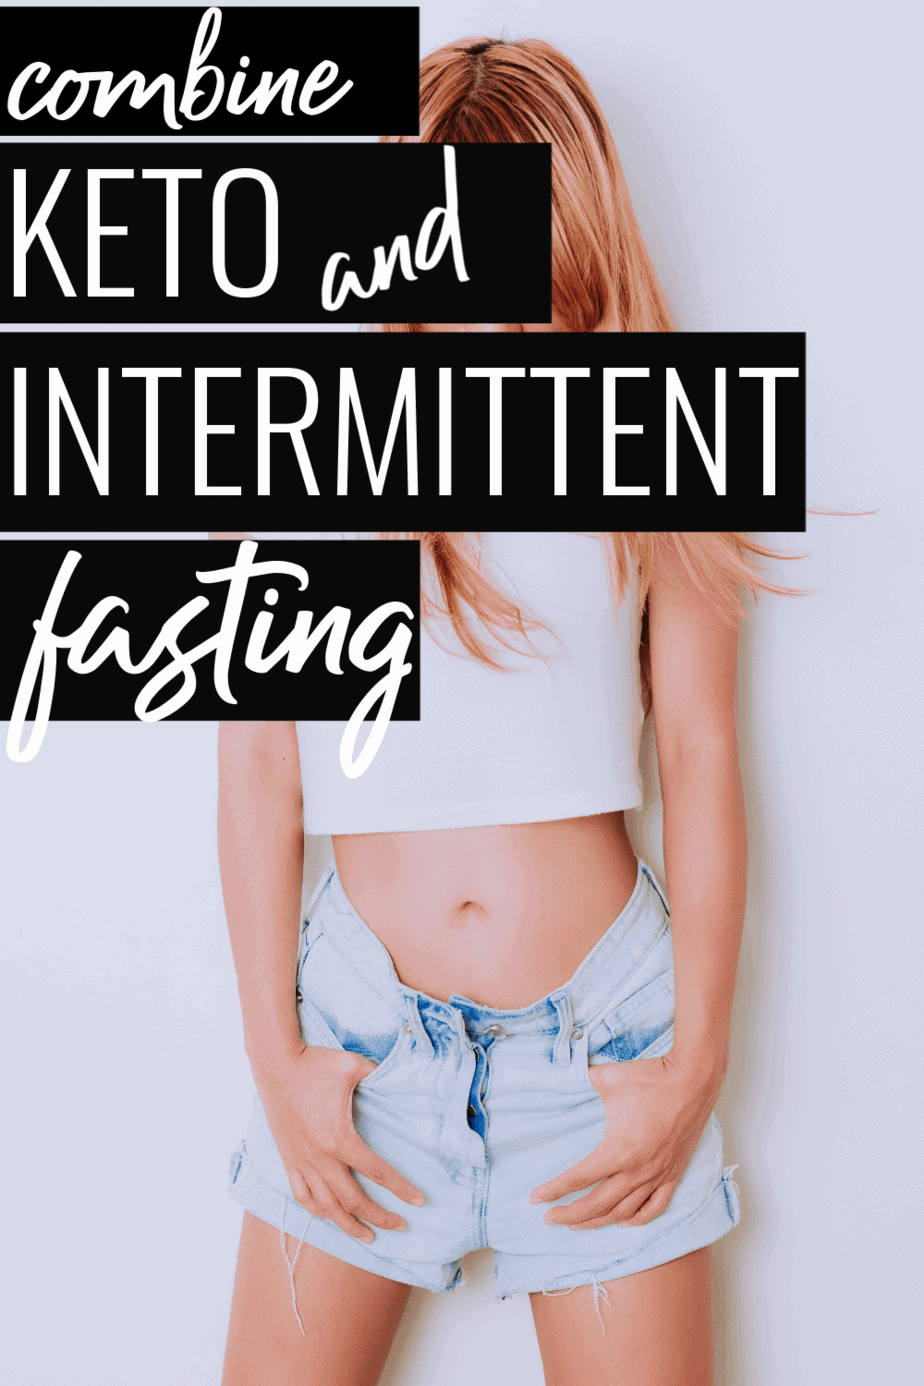 Keto and Intermittent Fasting Combined For Greater Weight Loss